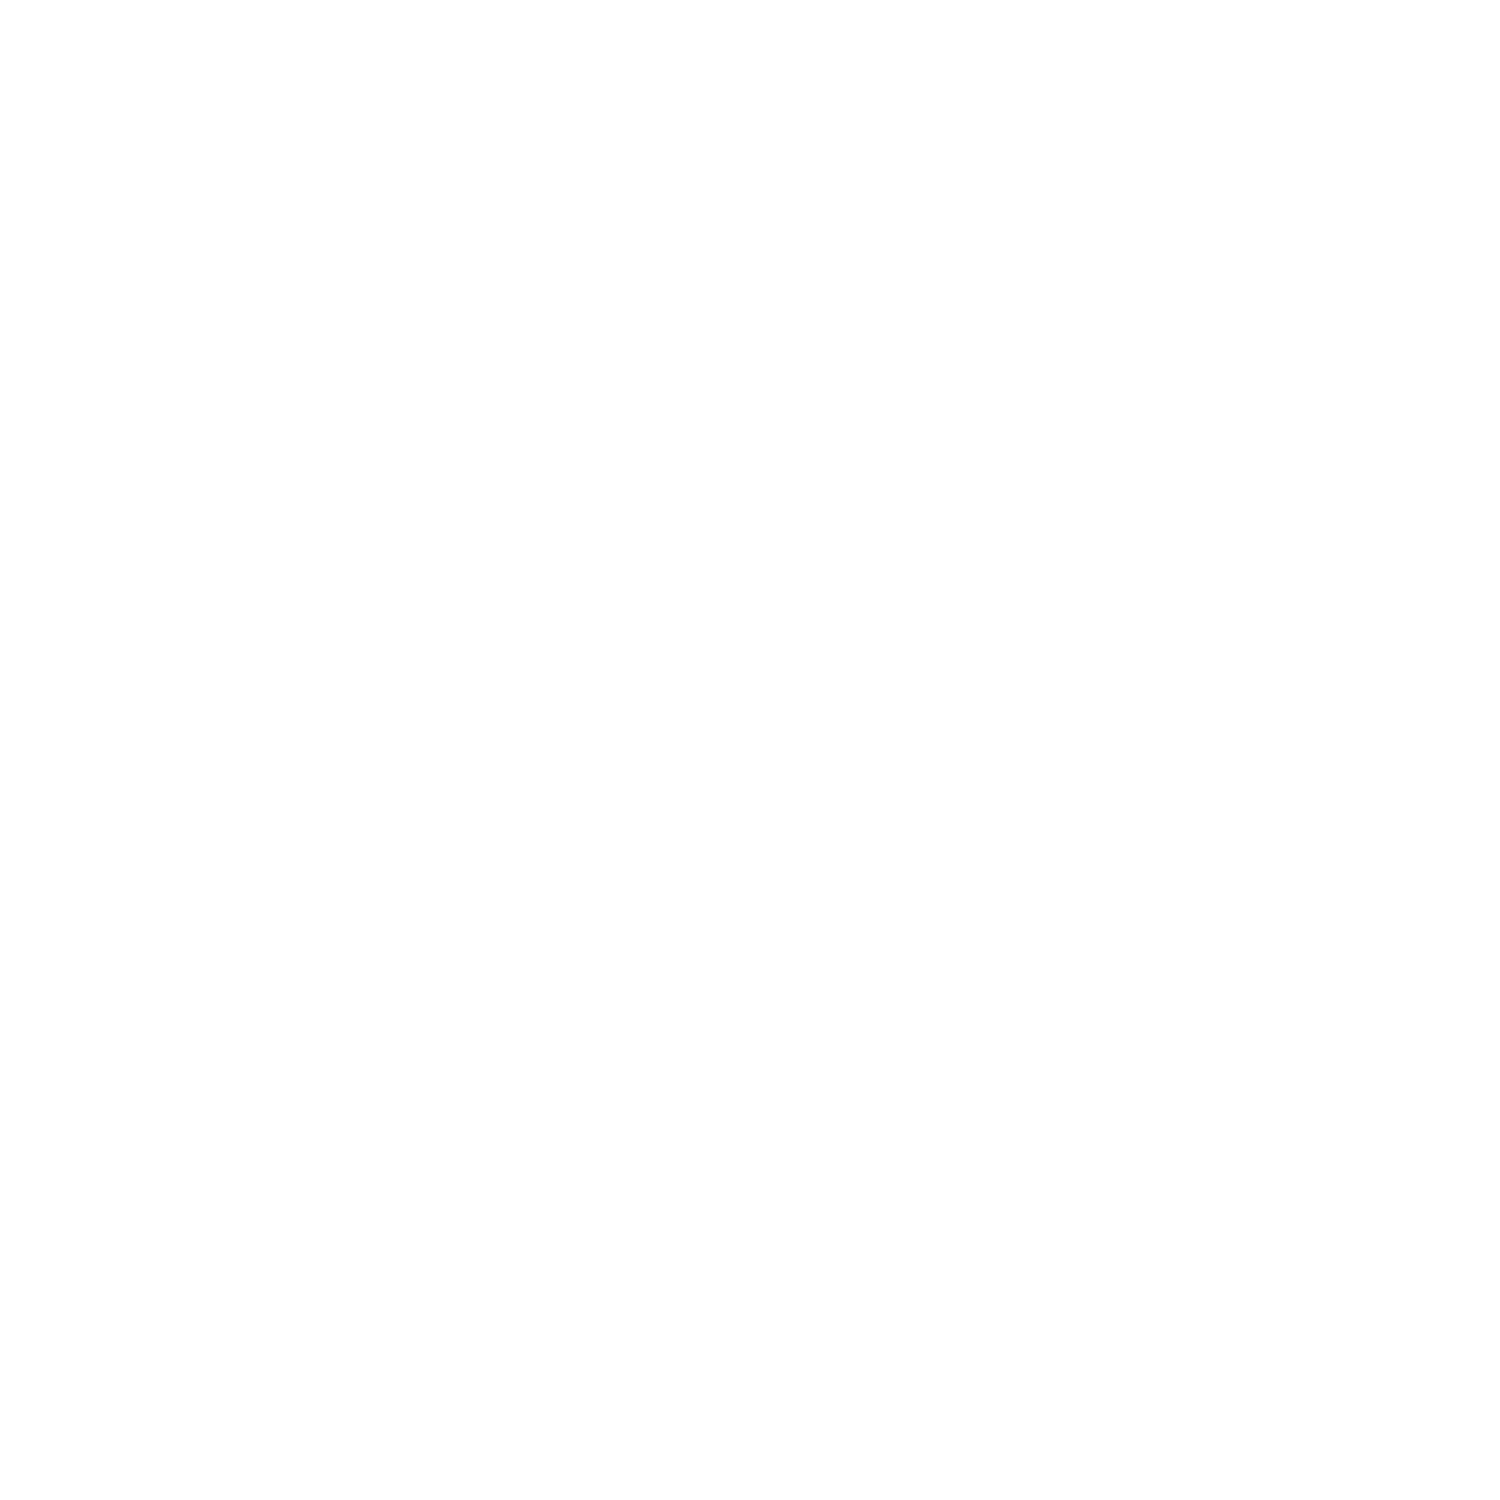 Cheese & Spice Market